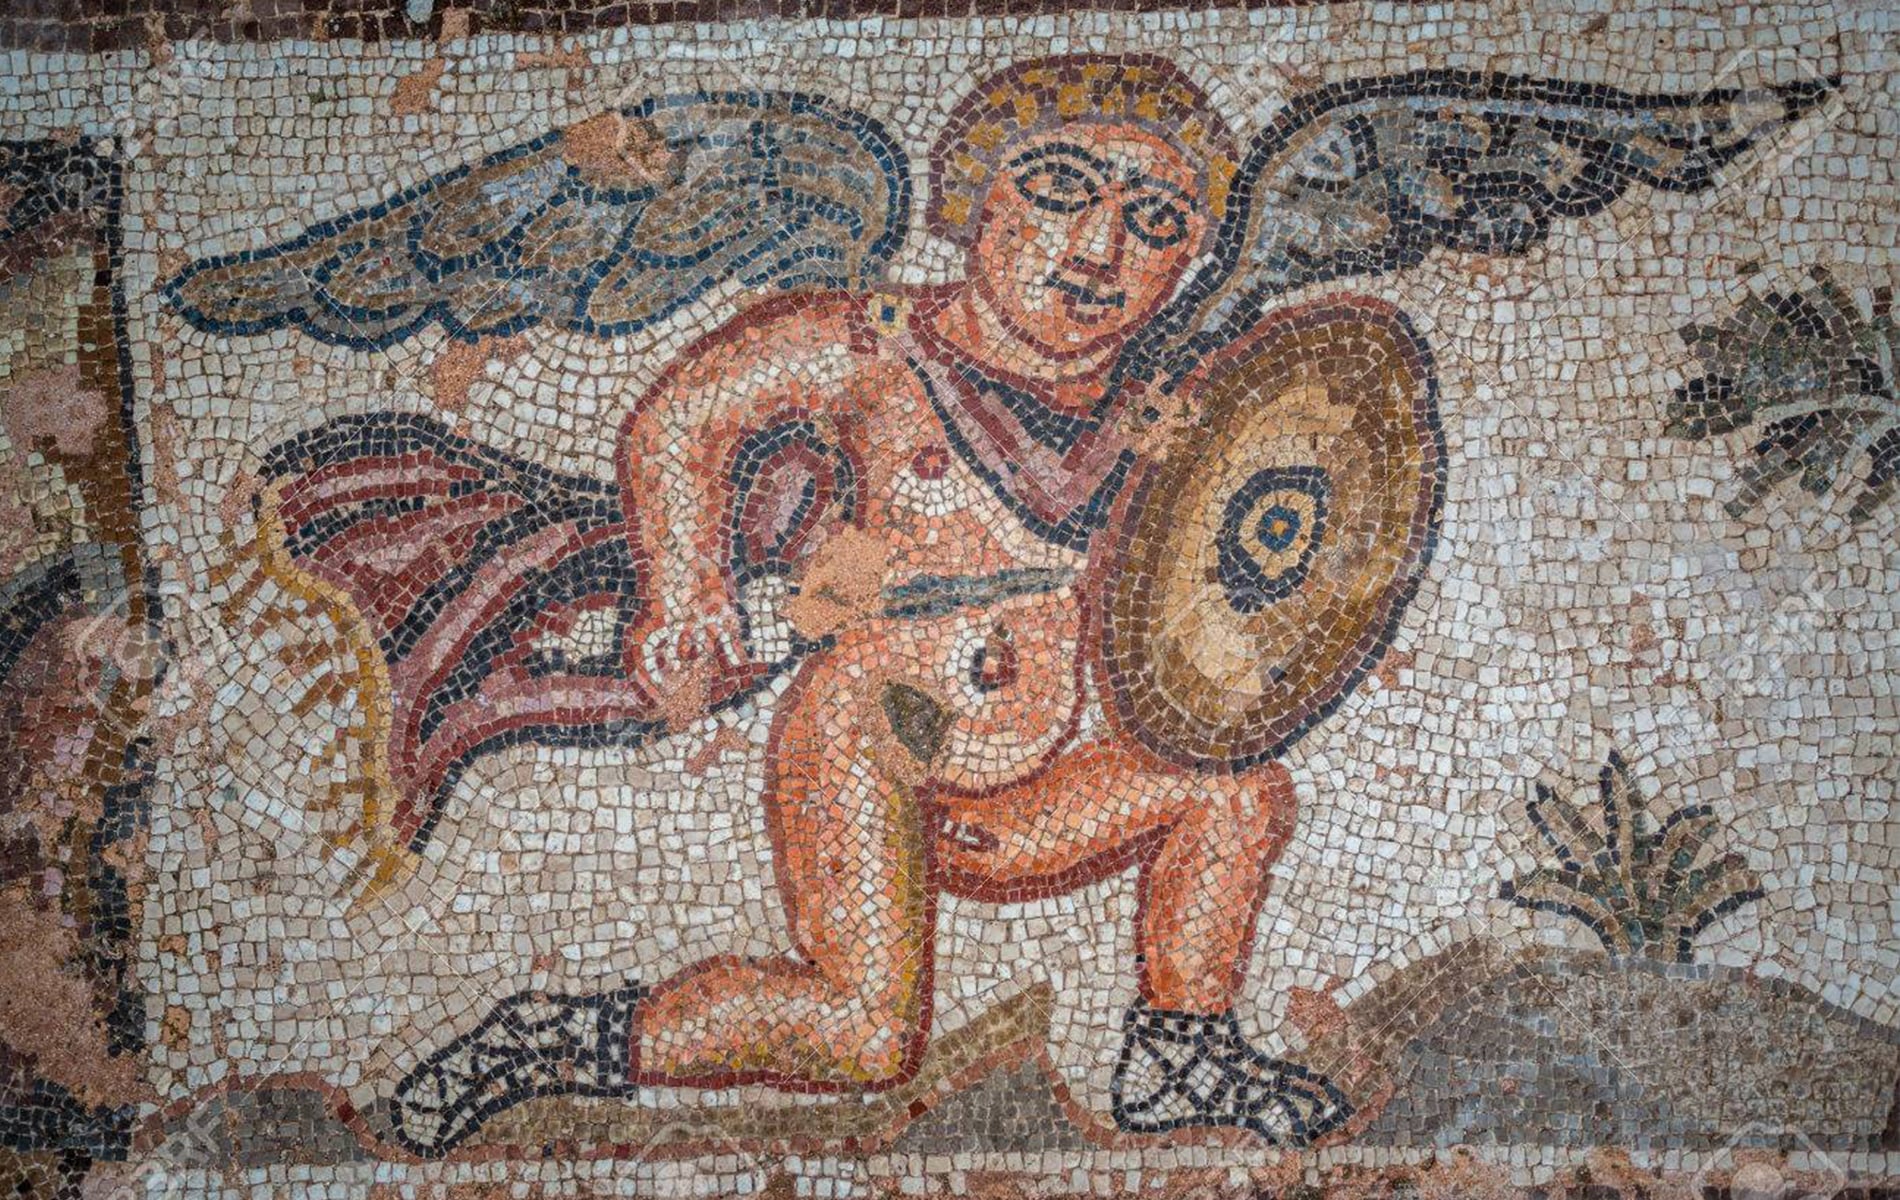 Visit Paphos Mosaics in a taxi in Paphos